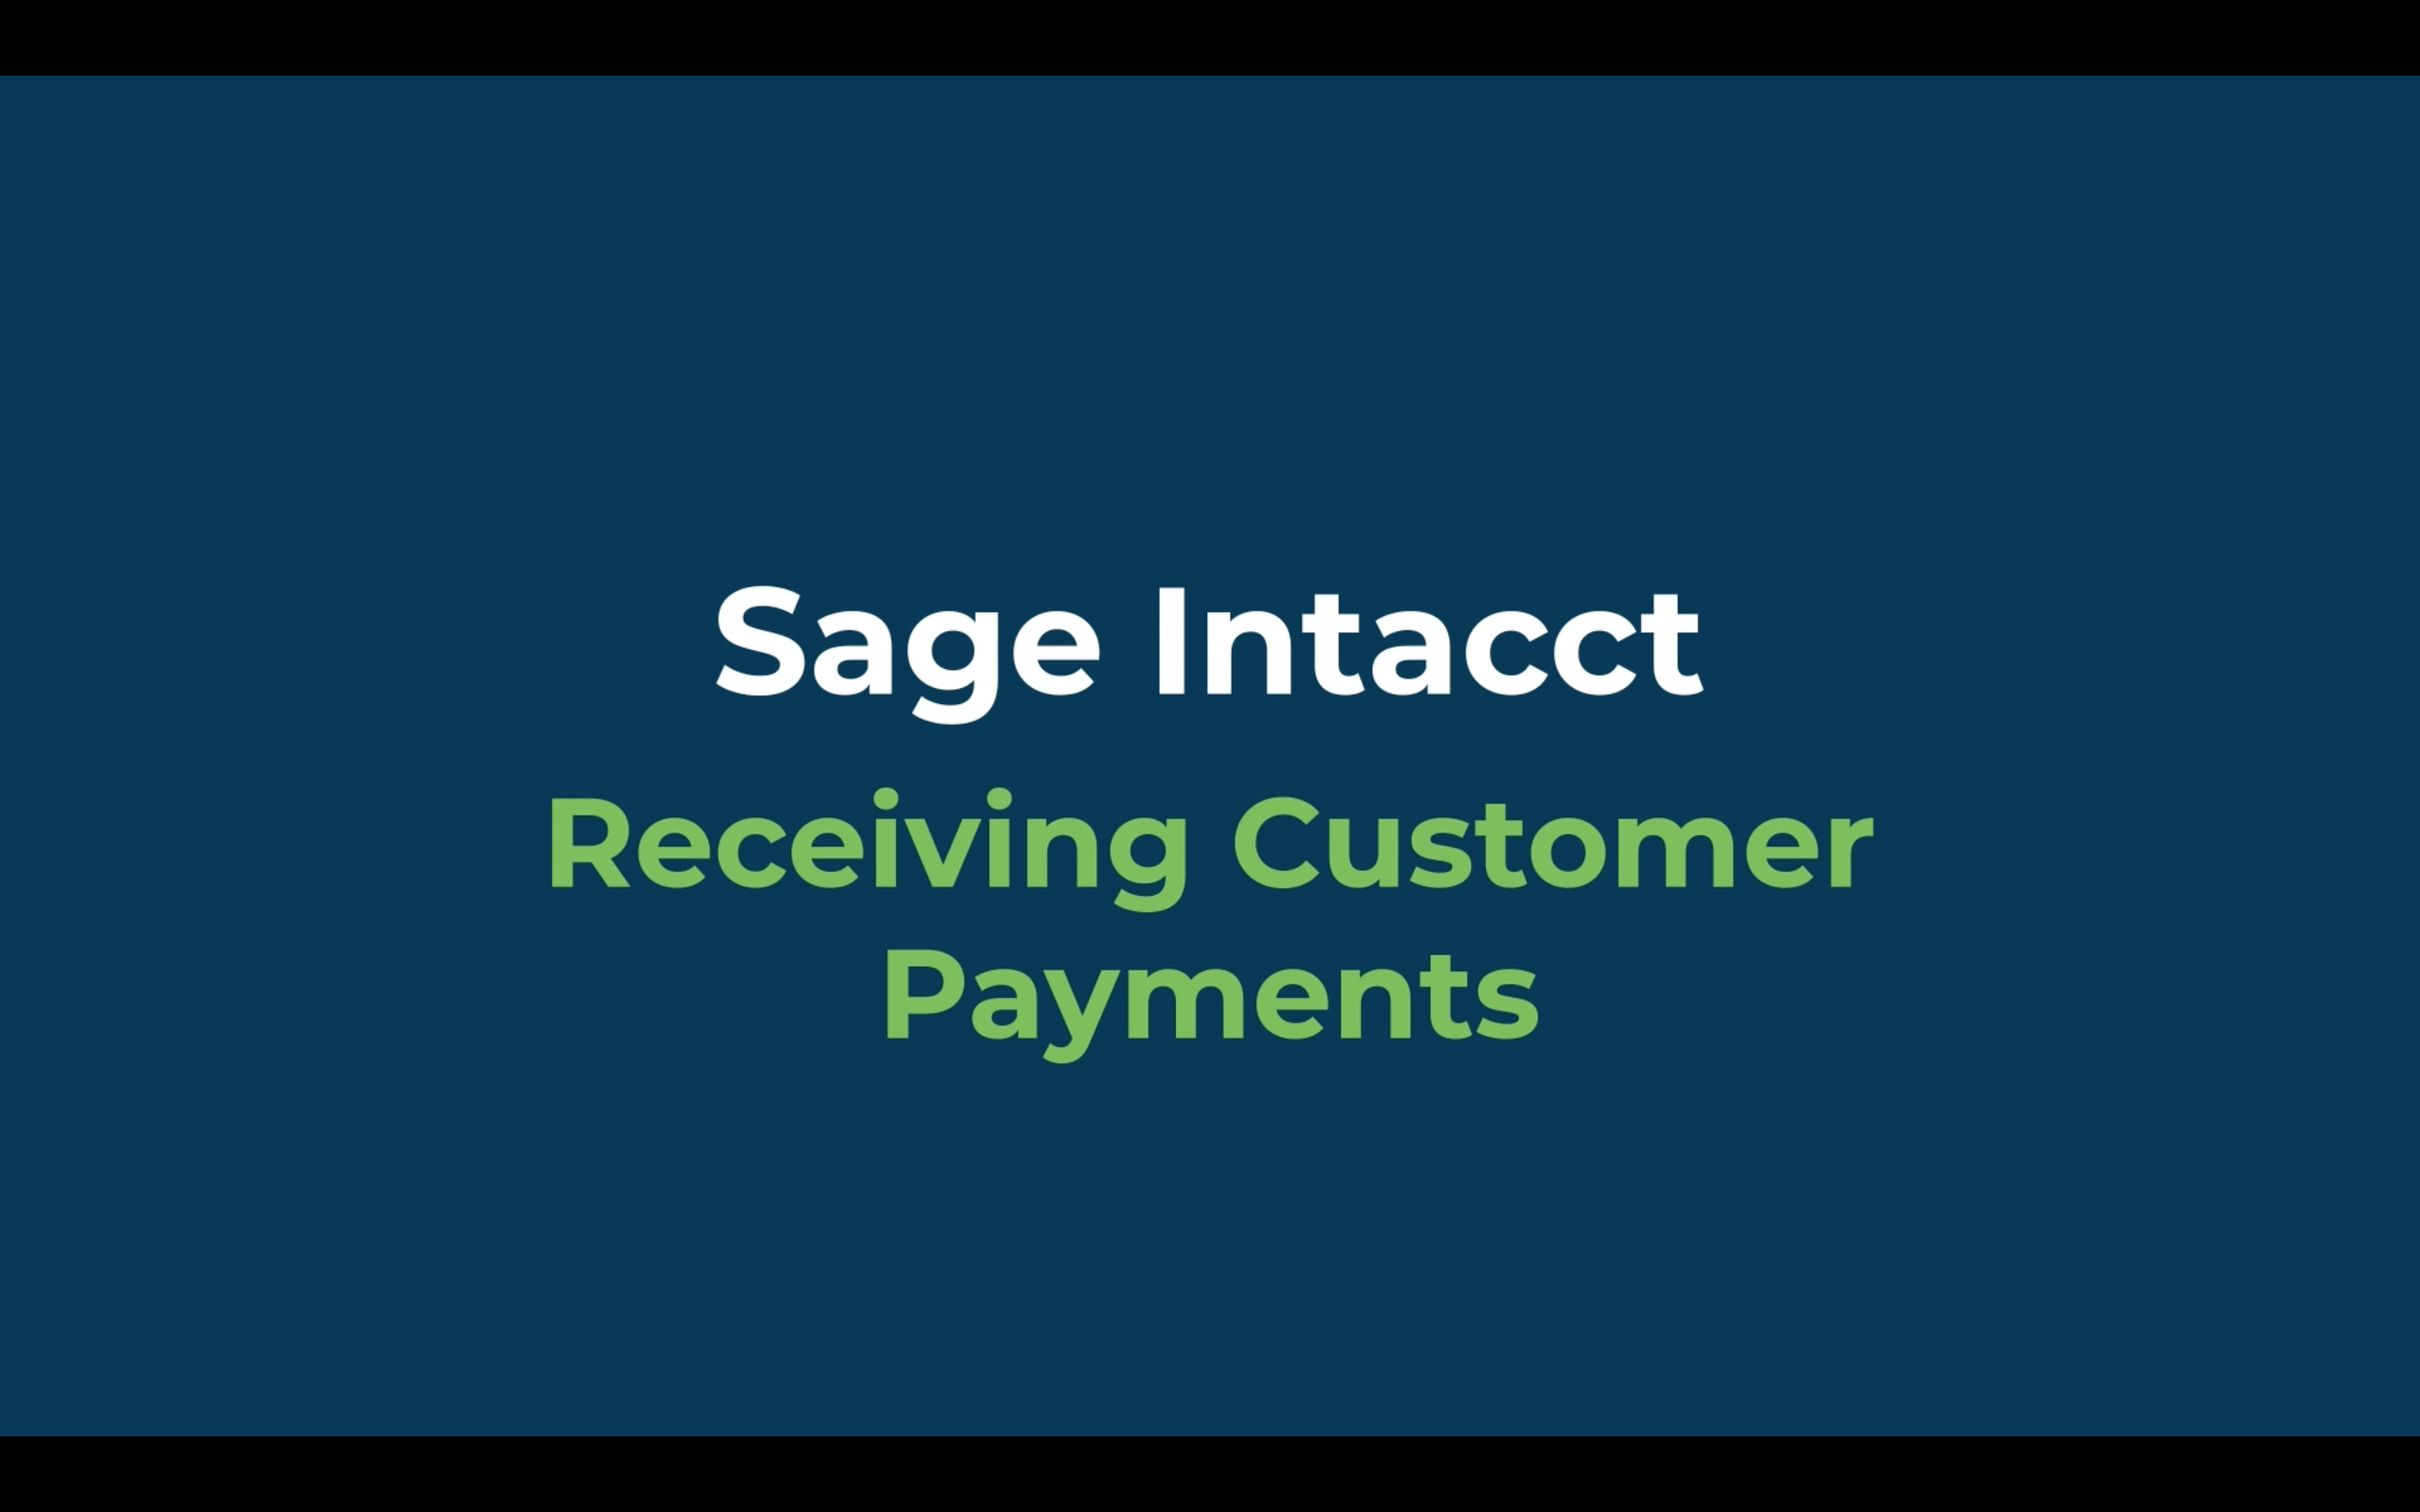 receiving customer payments in sage intacct